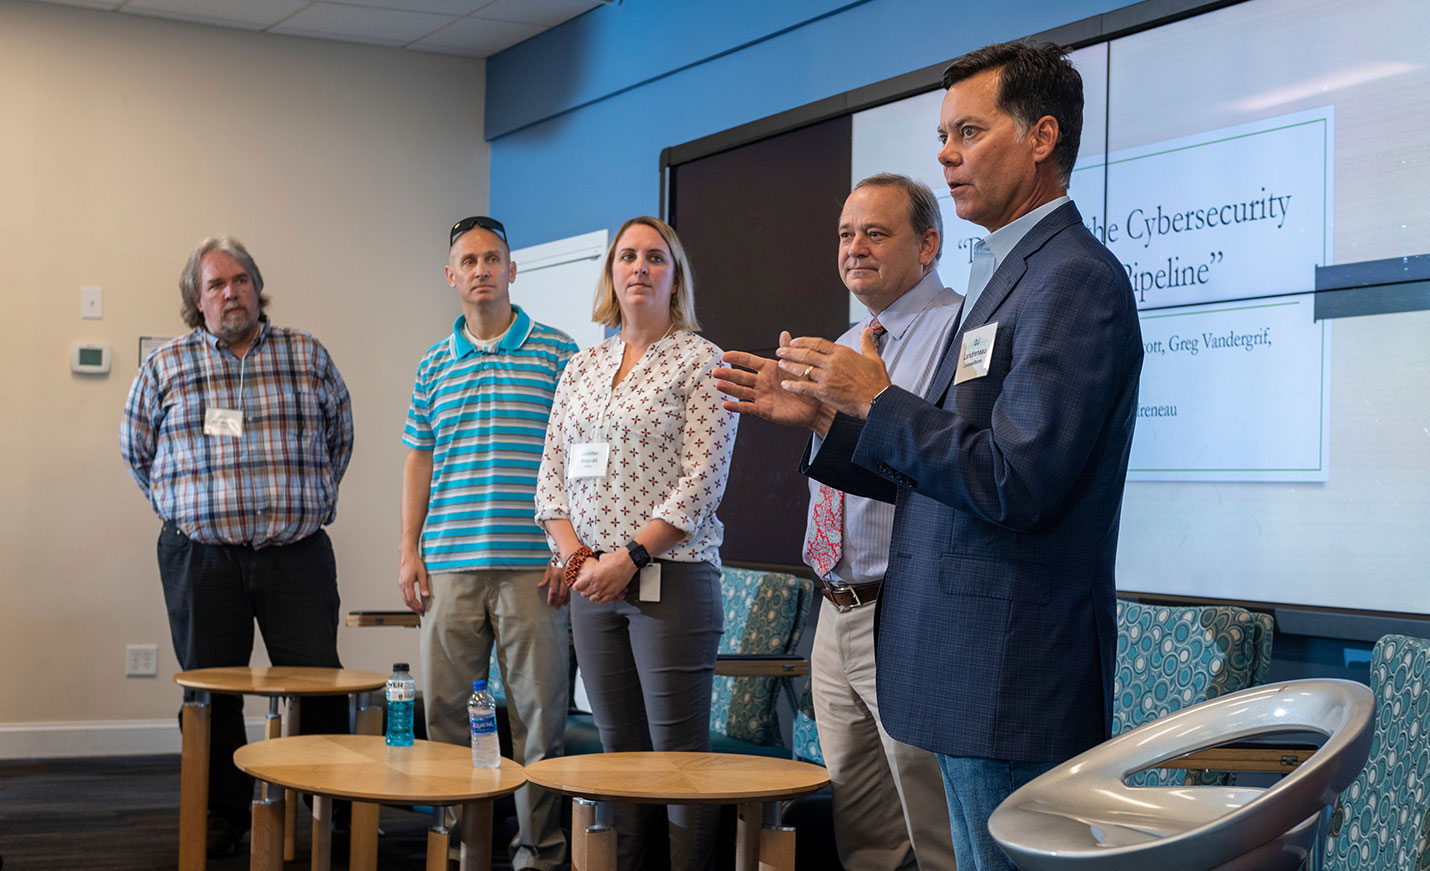 A speaker standing with a group of other presenters talks at a cybersecurity event